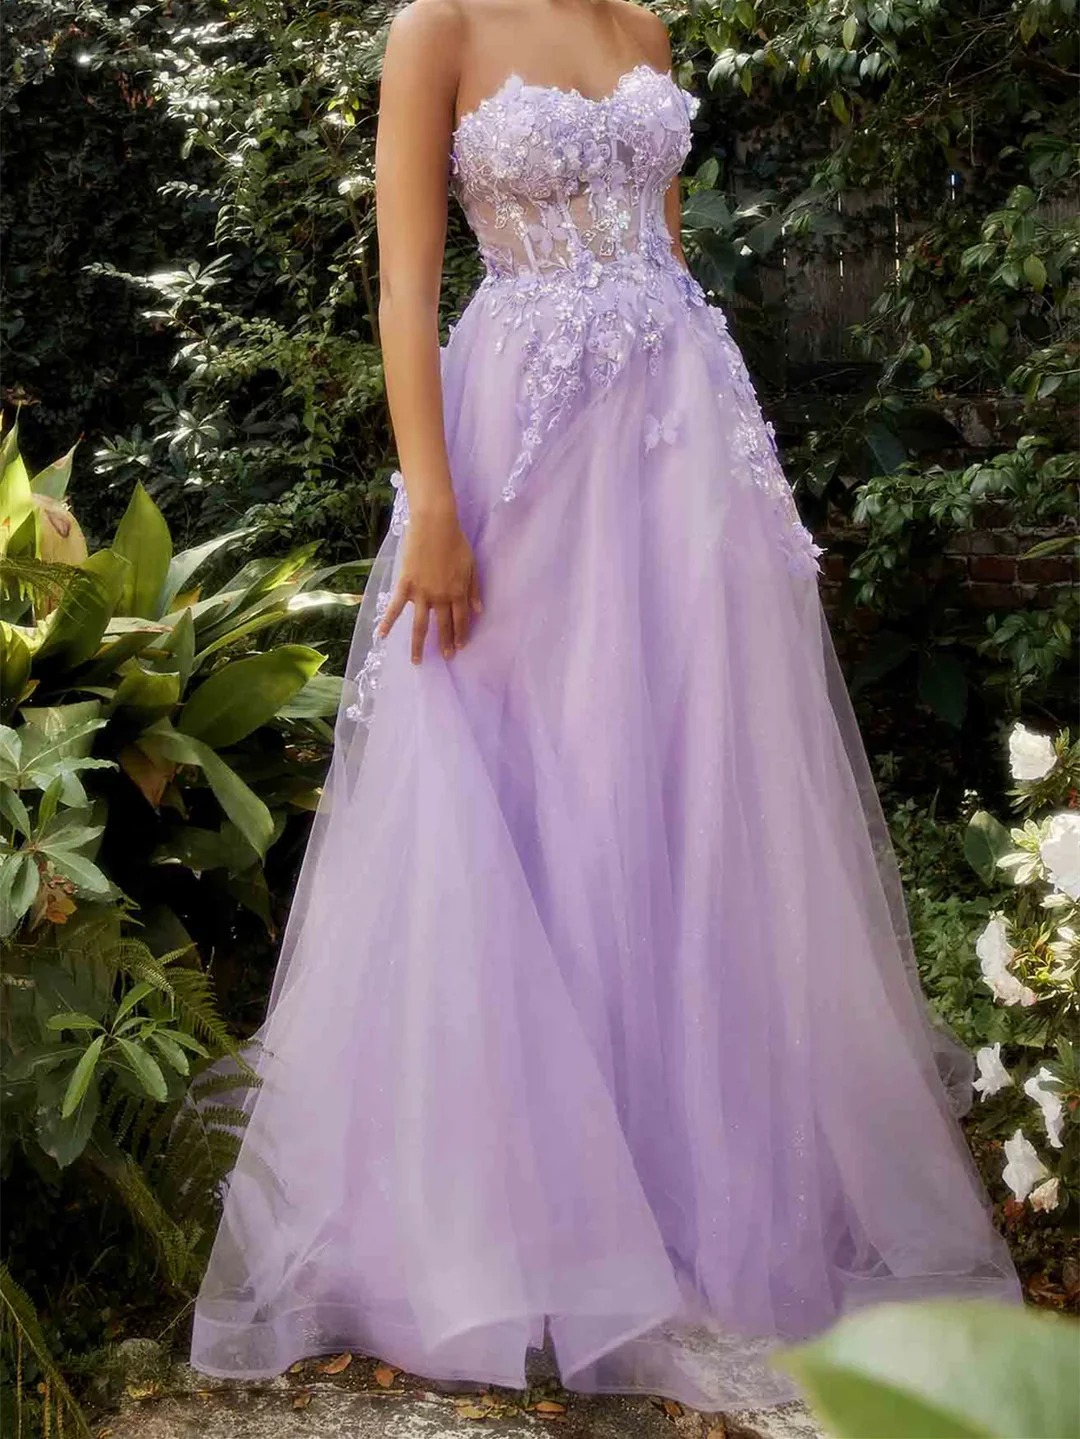 Wholesa A-Line Sweetheart Short Sleeves Floor-Length Long Prom Dresses With Flowers